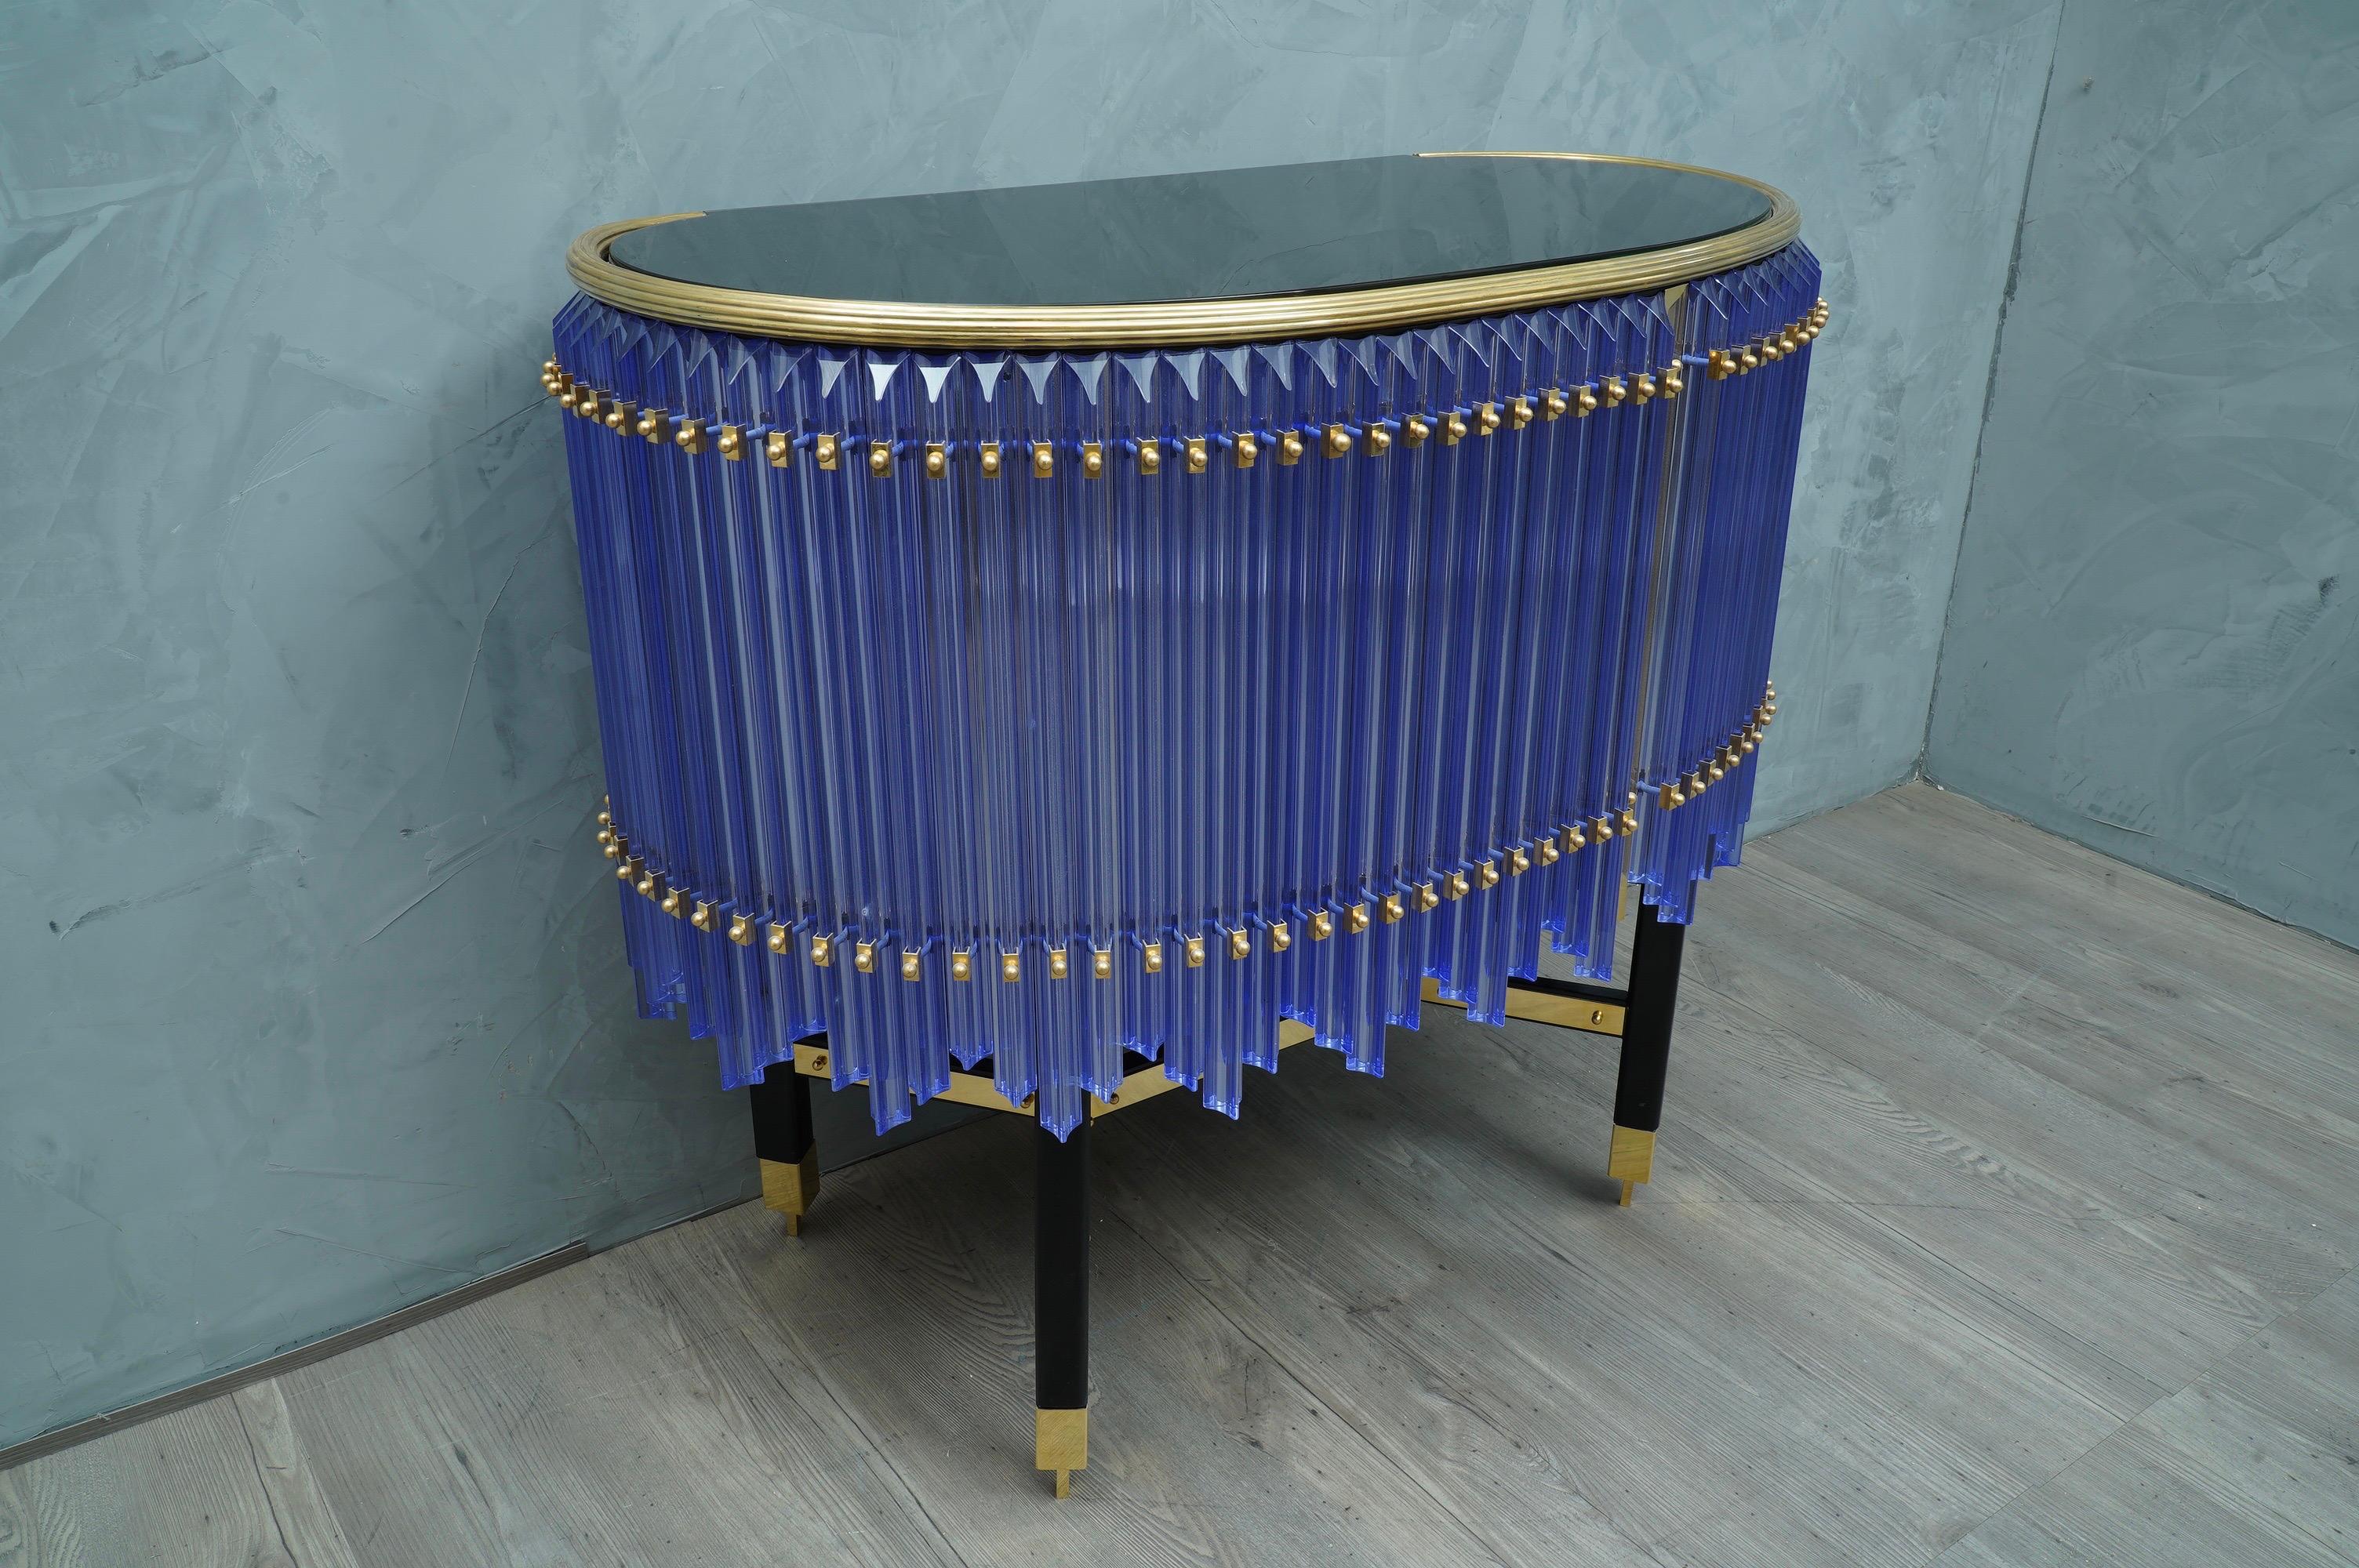 Precious handwork of a beautiful periwinkle color enhanced by polished brass finishes, exalting both for its precious materials and for its shape.

The sideboard / bar has a wooden structure, with an oval shape squashed in the back side. The body of